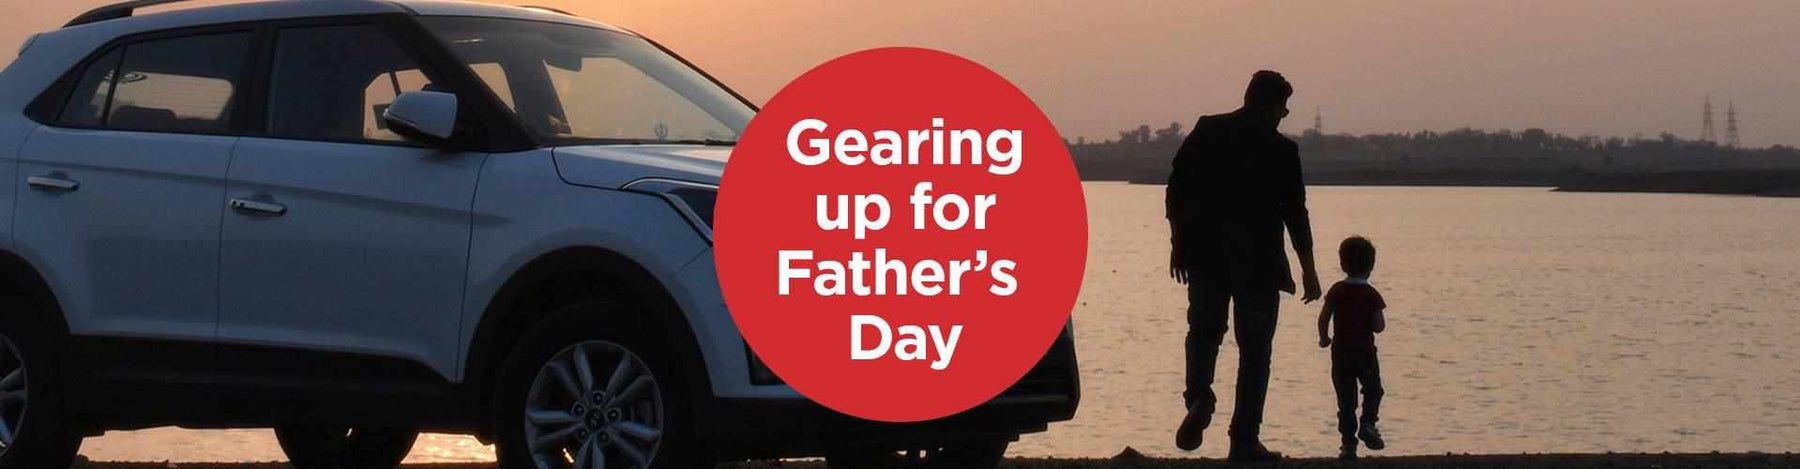 Gearing up for Father's Day - - BlackboxMyCar